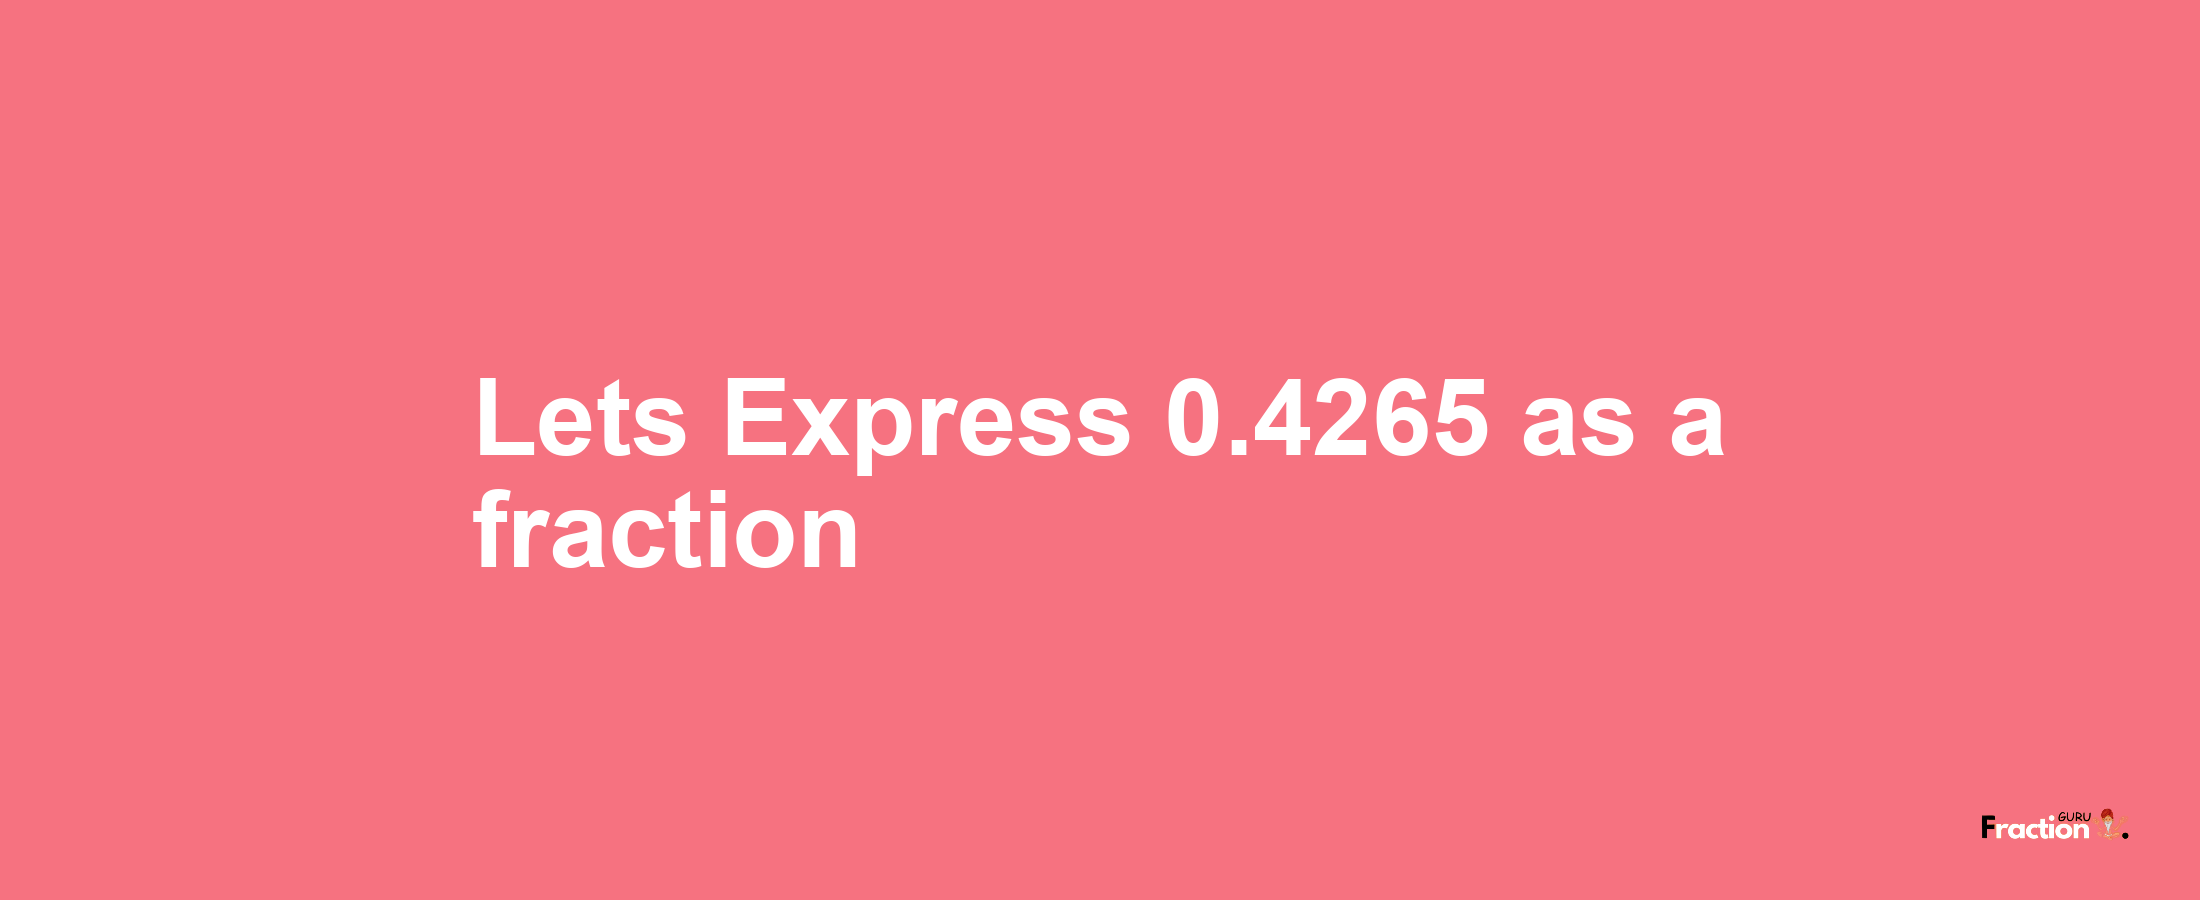 Lets Express 0.4265 as afraction